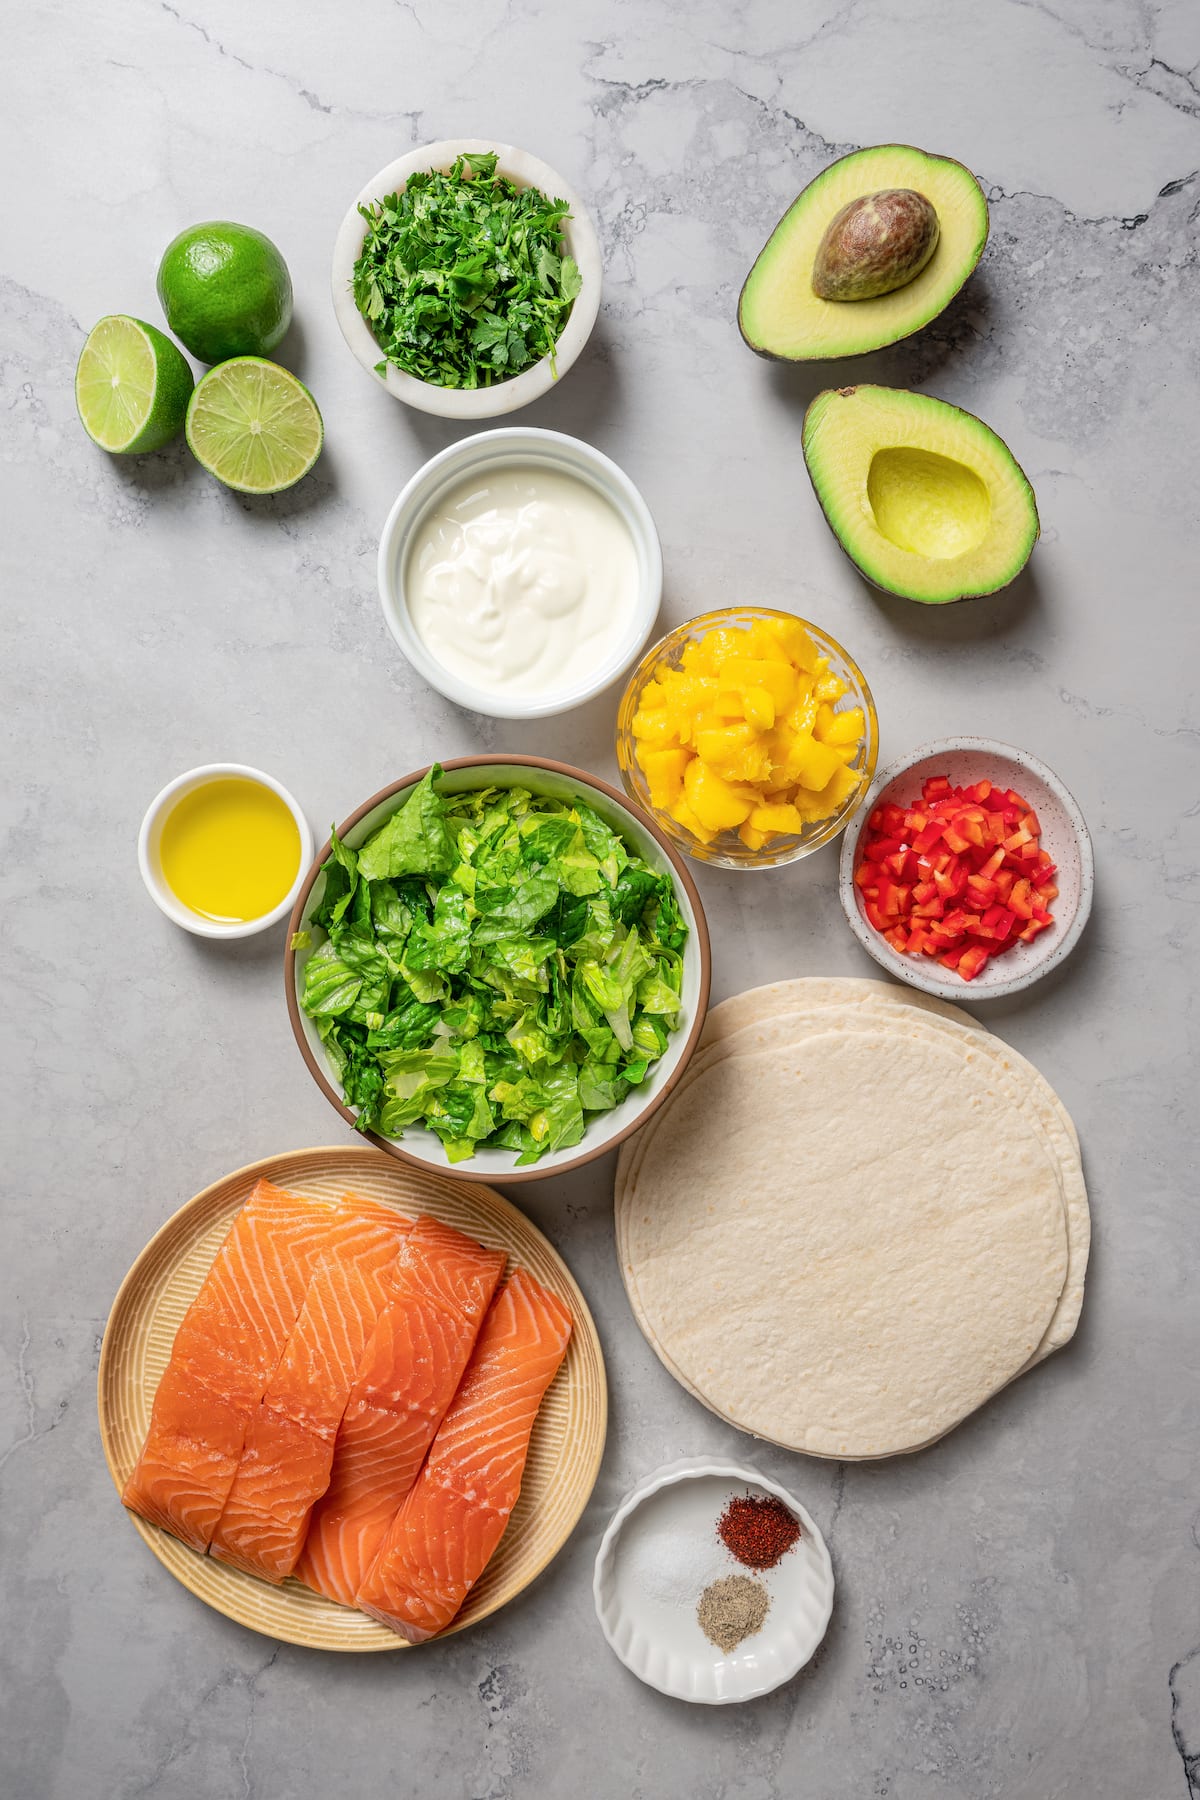 Ingredients for salmon tacos arranged on a work surface.